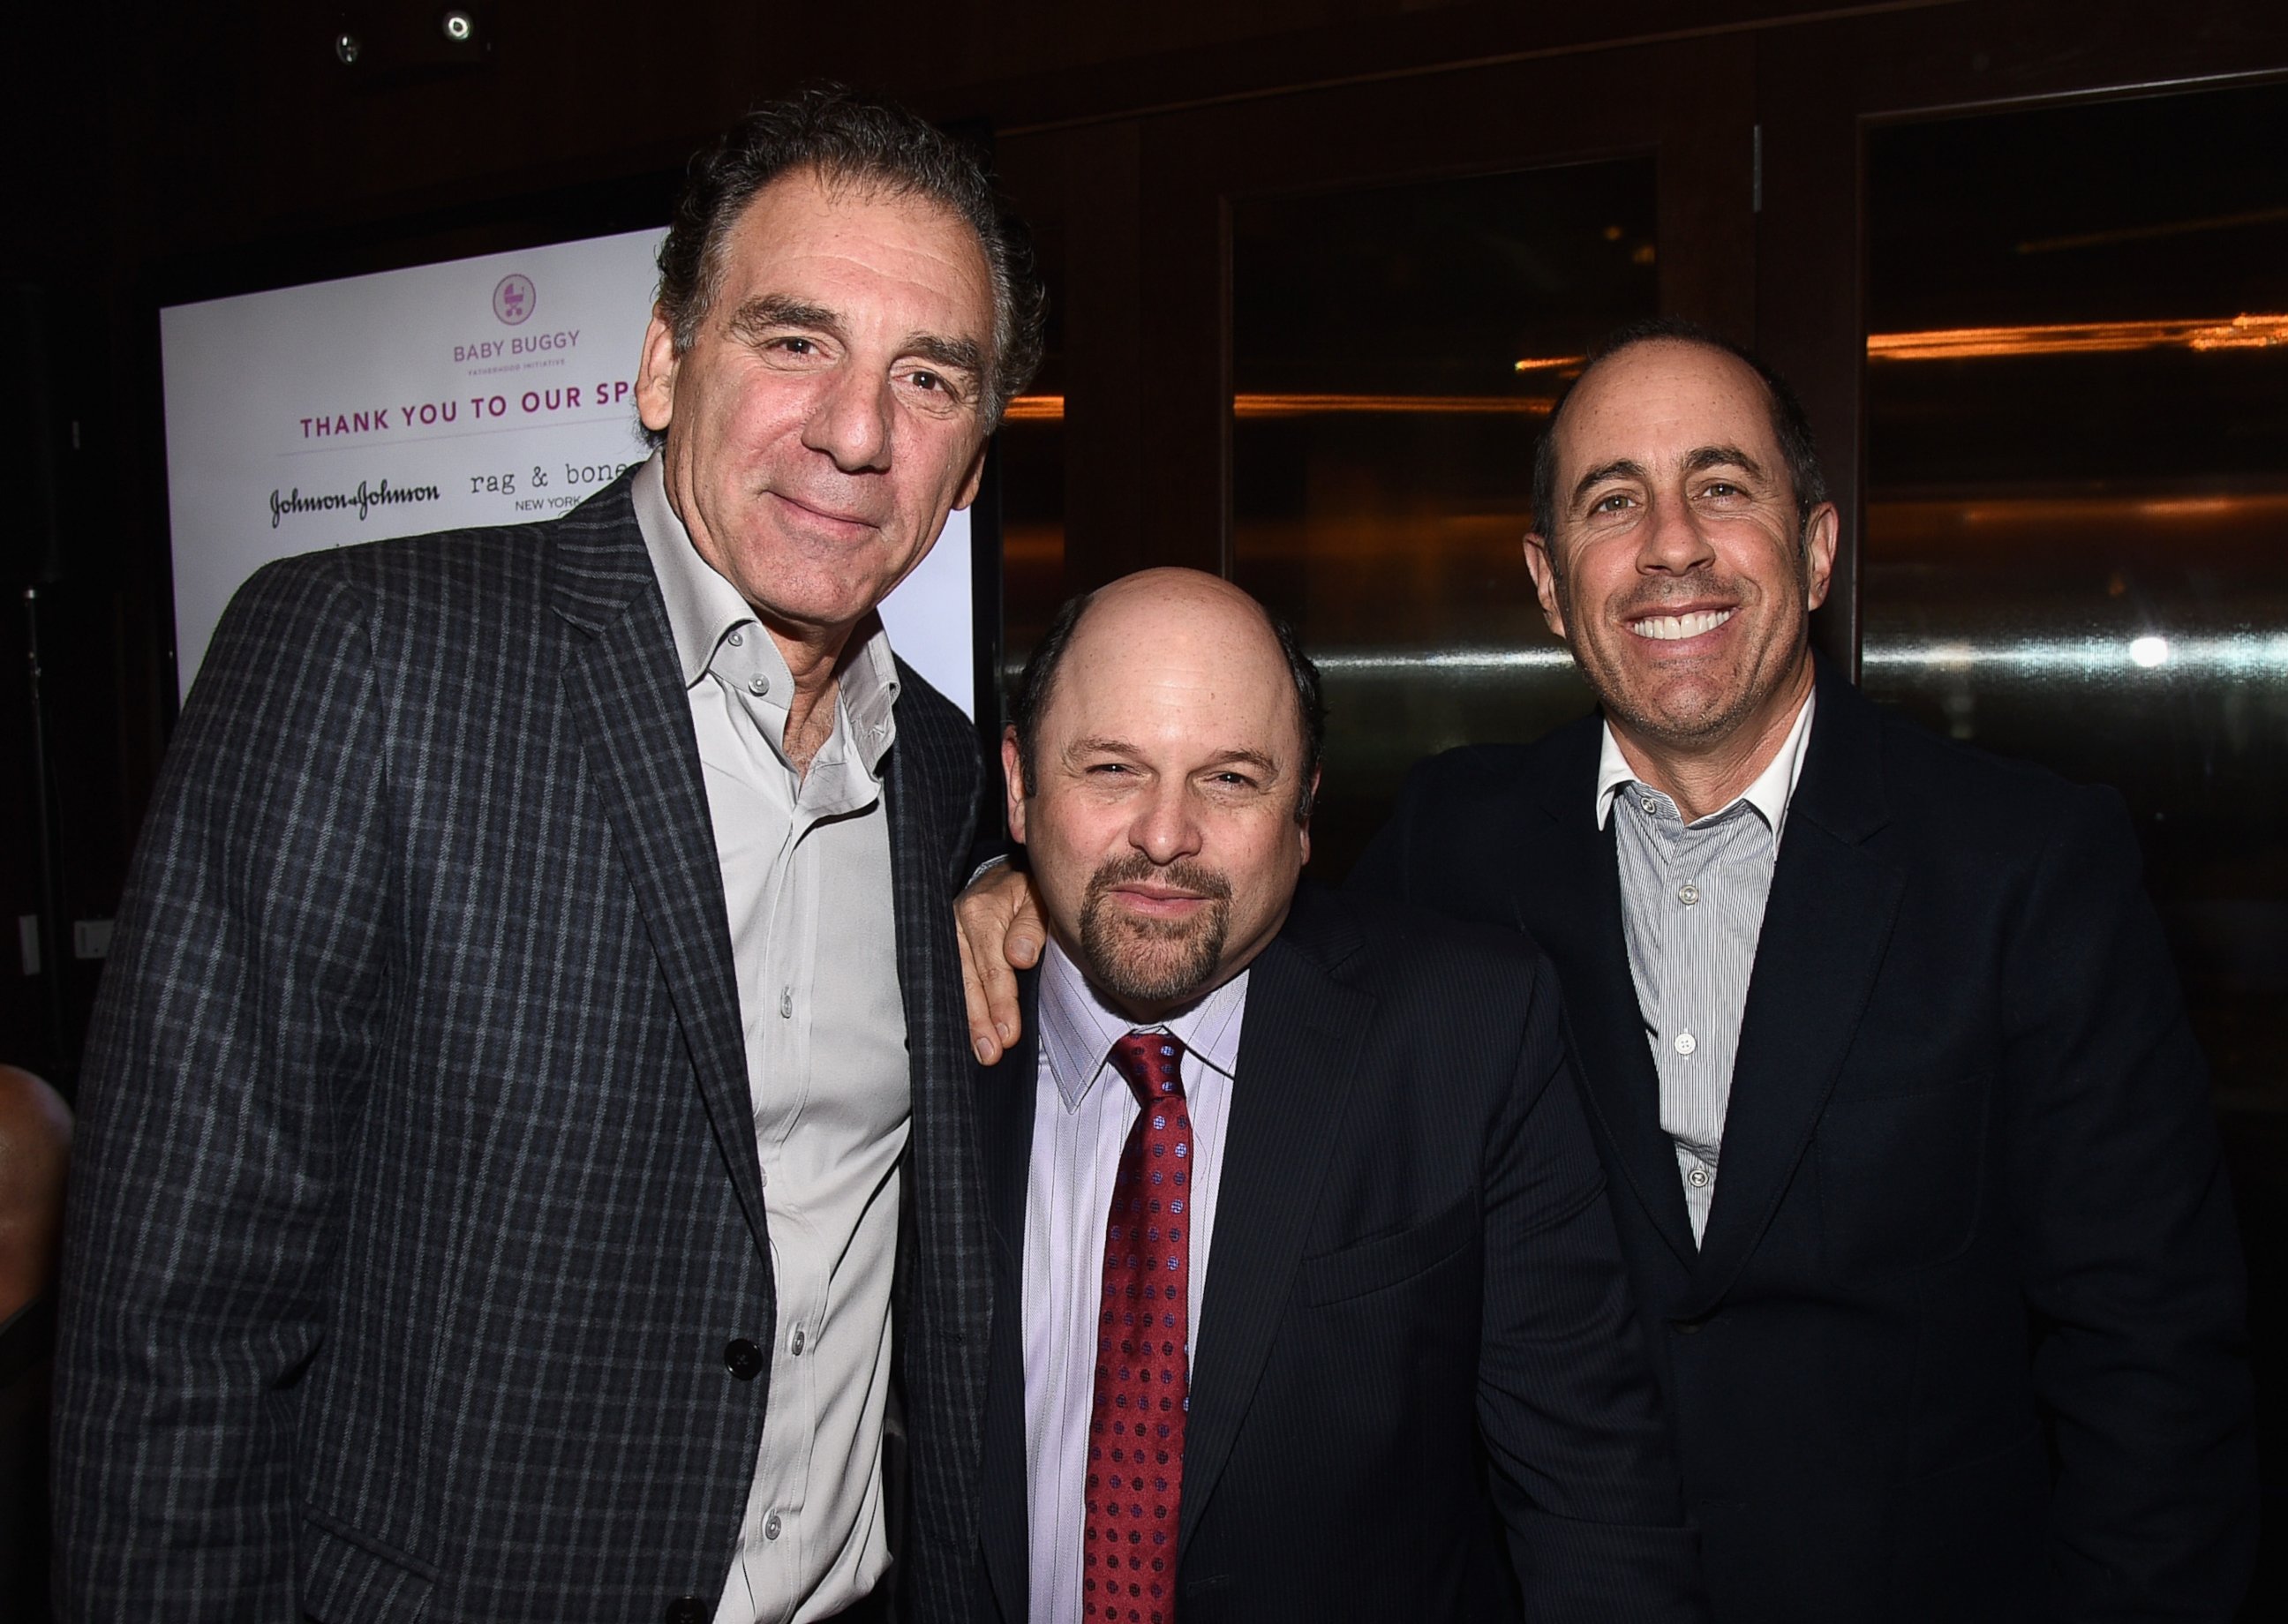 PHOTO: Actors Michael Richards, Jason Alexander and host Jerry Seinfeld attend the Inaugural Los Angeles Fatherhood Lunch to Benefit Baby Buggy hosted by Jerry Seinfeld at The Palm Restaurant, March 4, 2015, in Beverly Hills, Calif. 